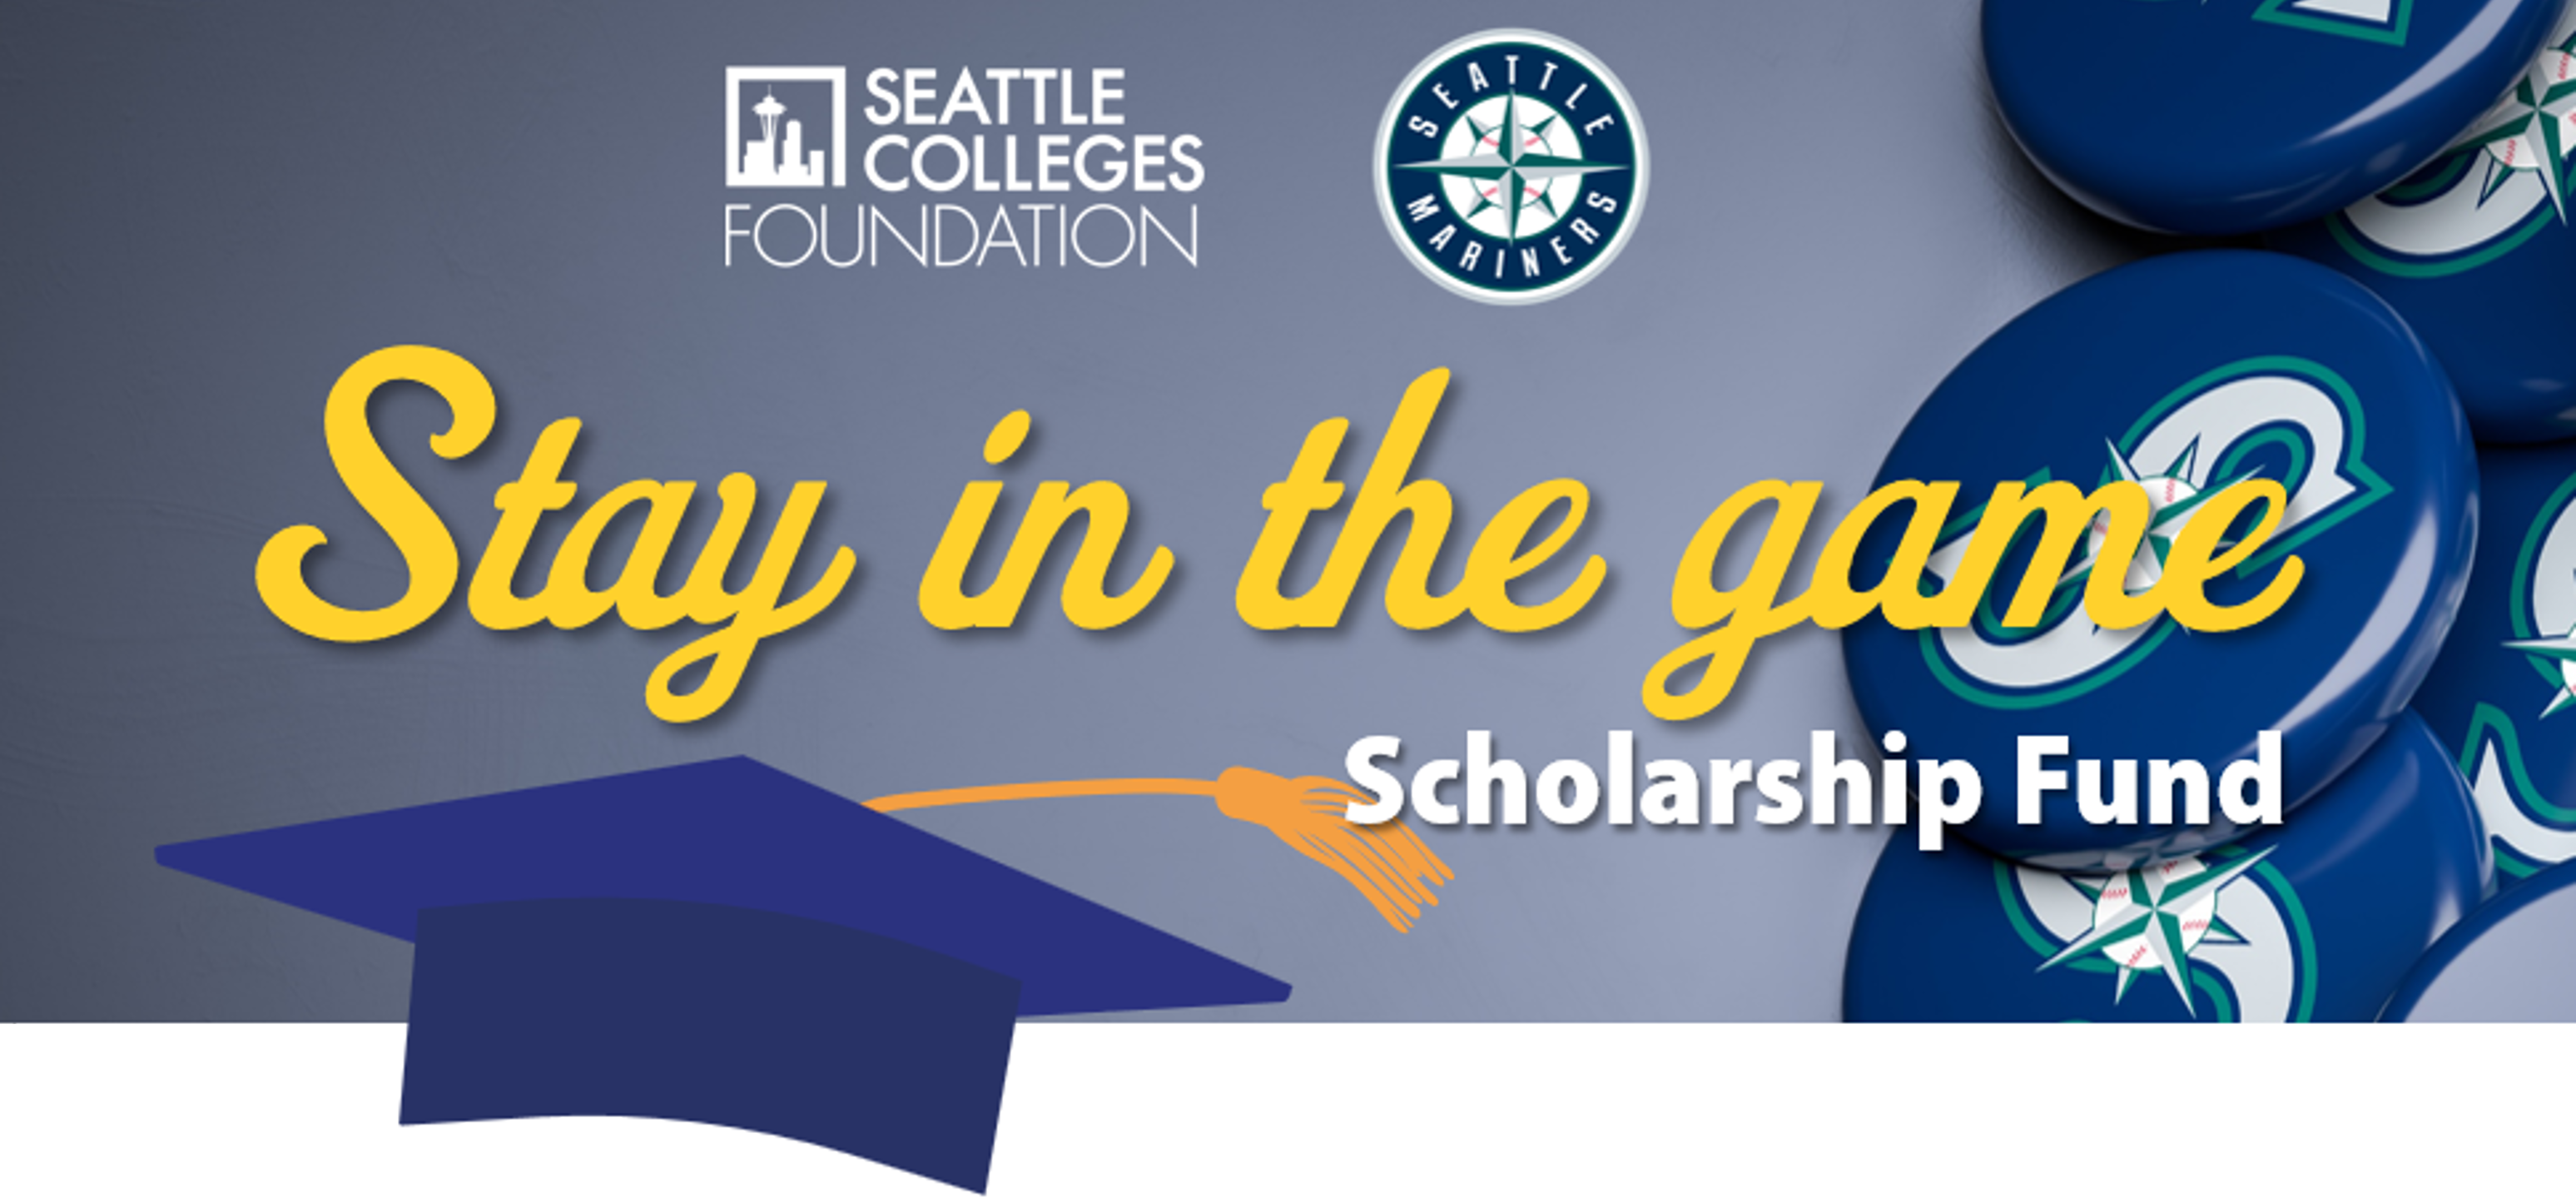 Stay in the Game scholarships graphic